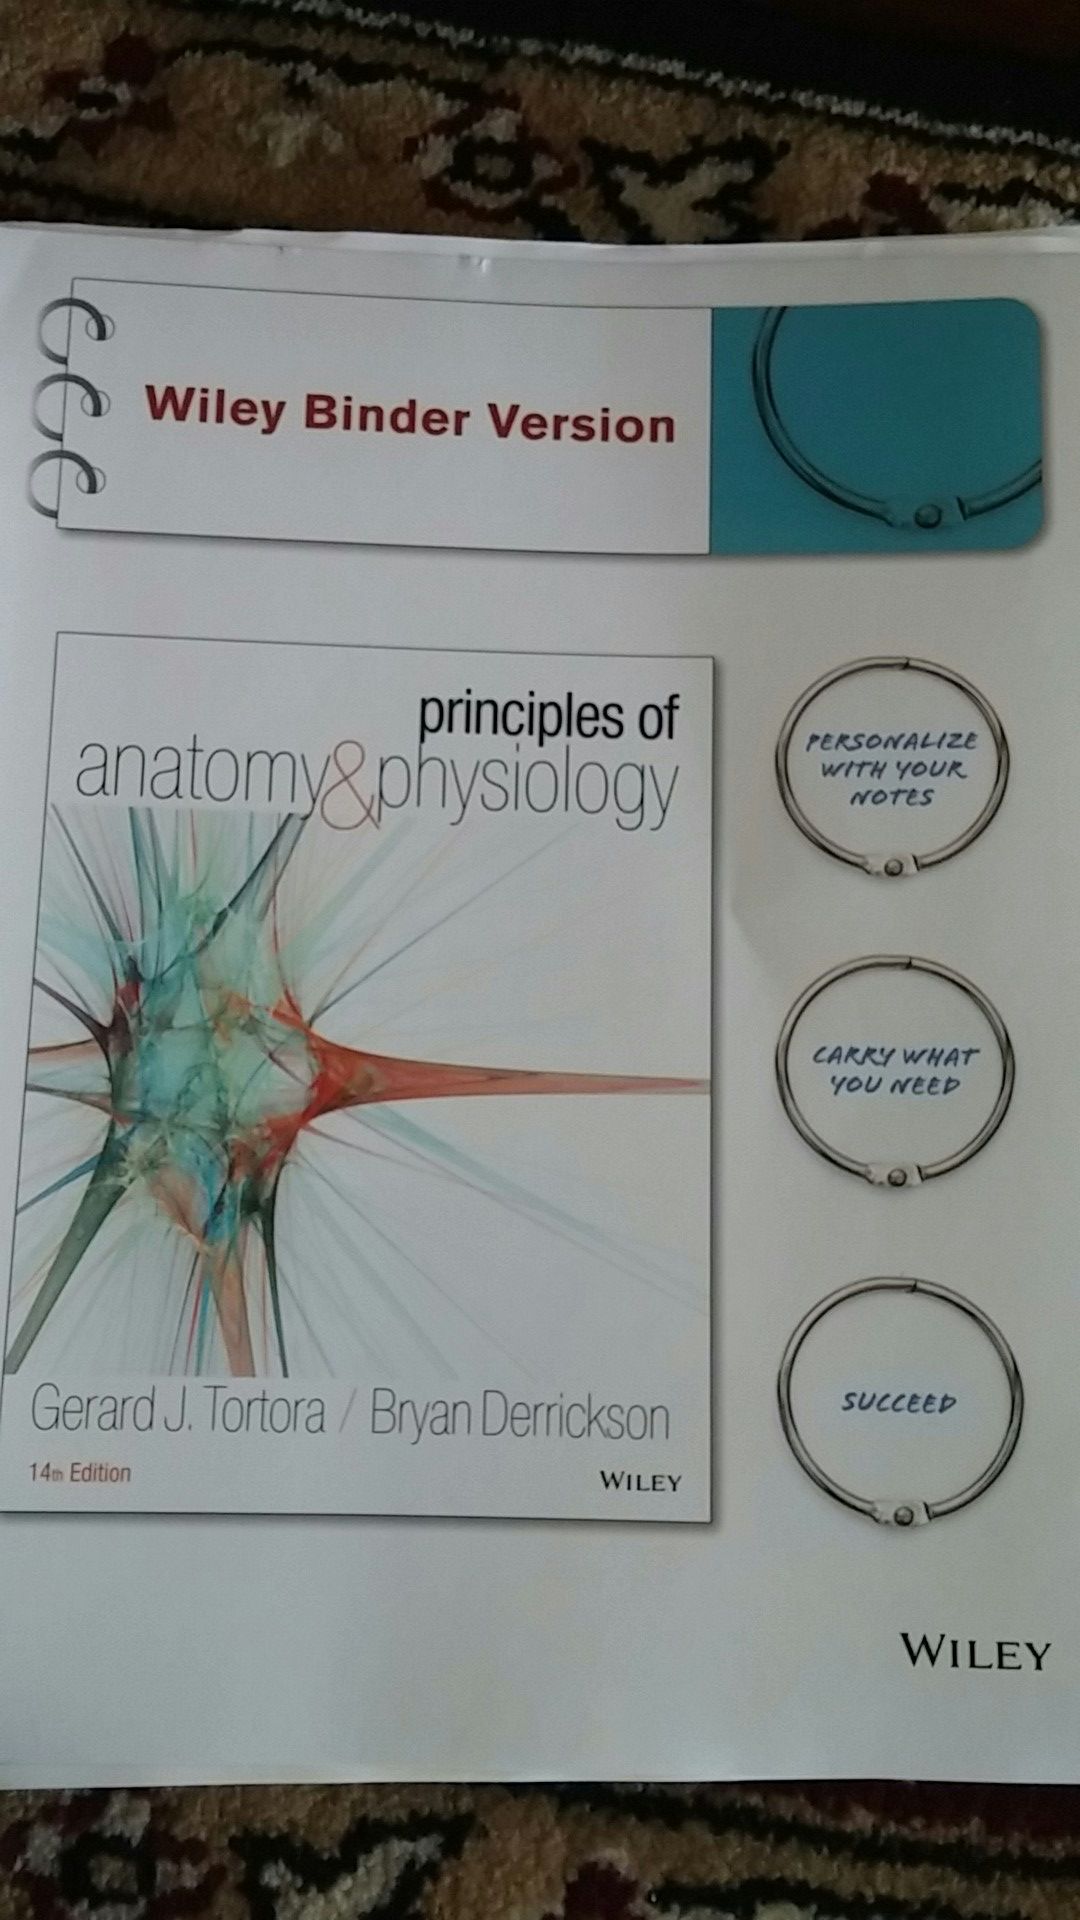 Wiley Principles of anatomy & physiology 14th edition